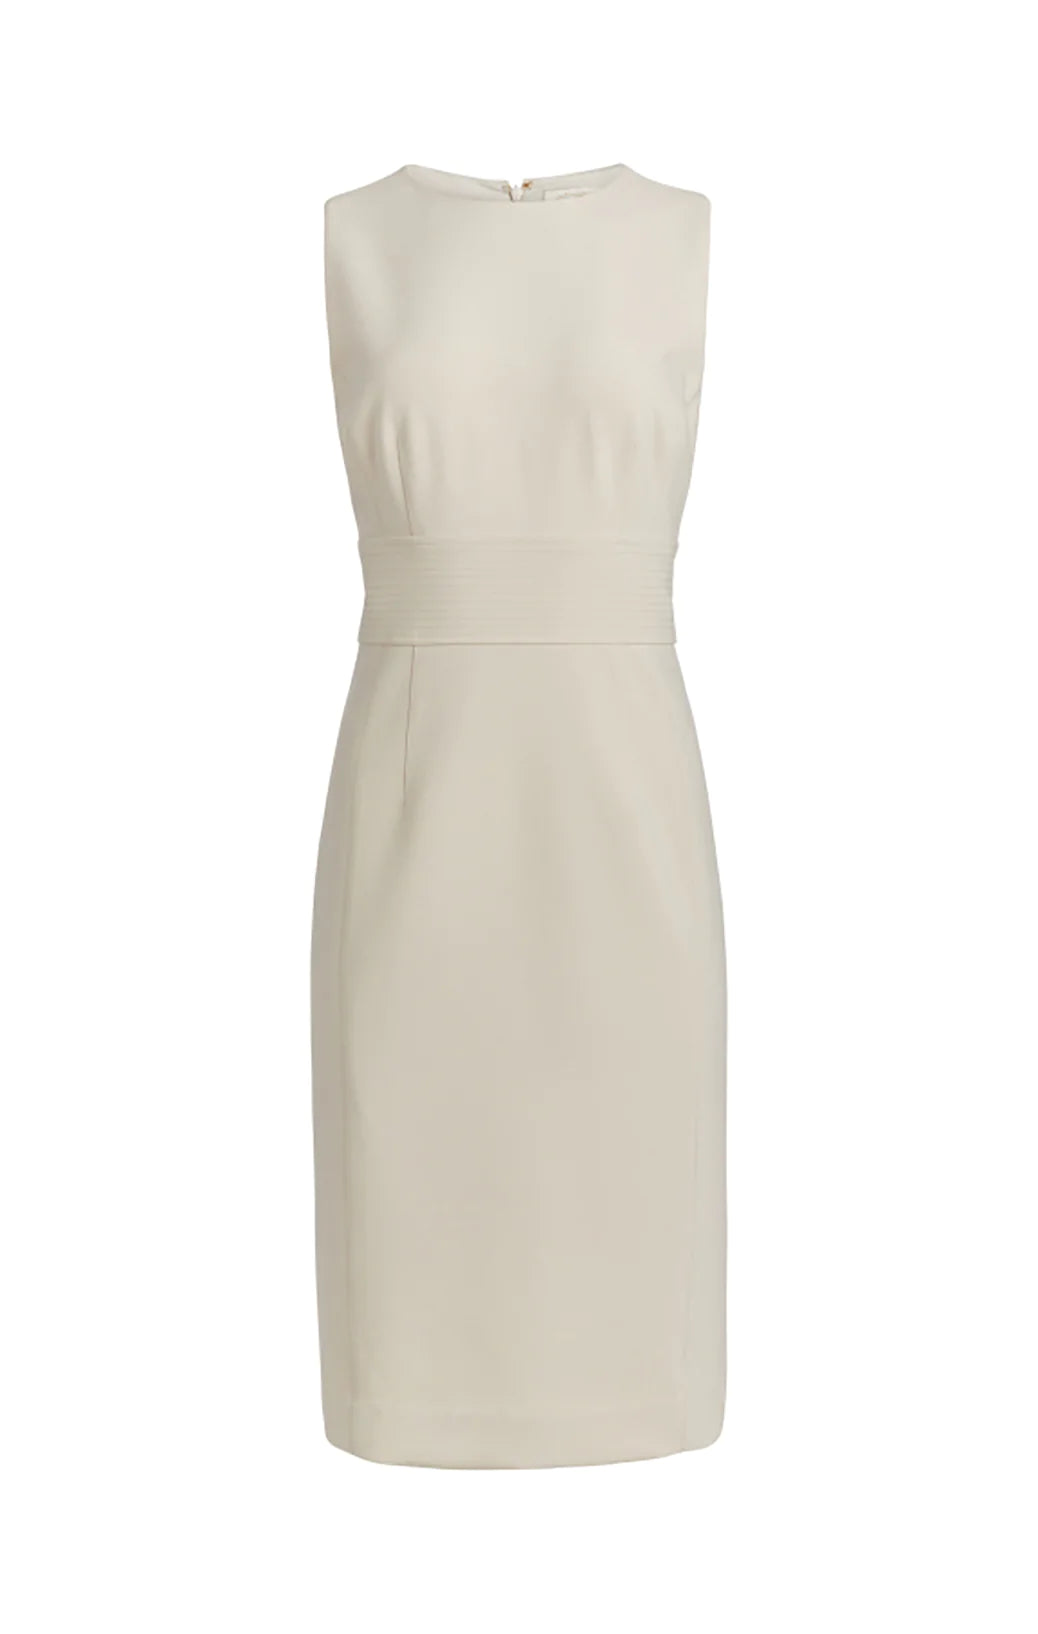 Enlightened - Little White Dress With Bows - Product Image